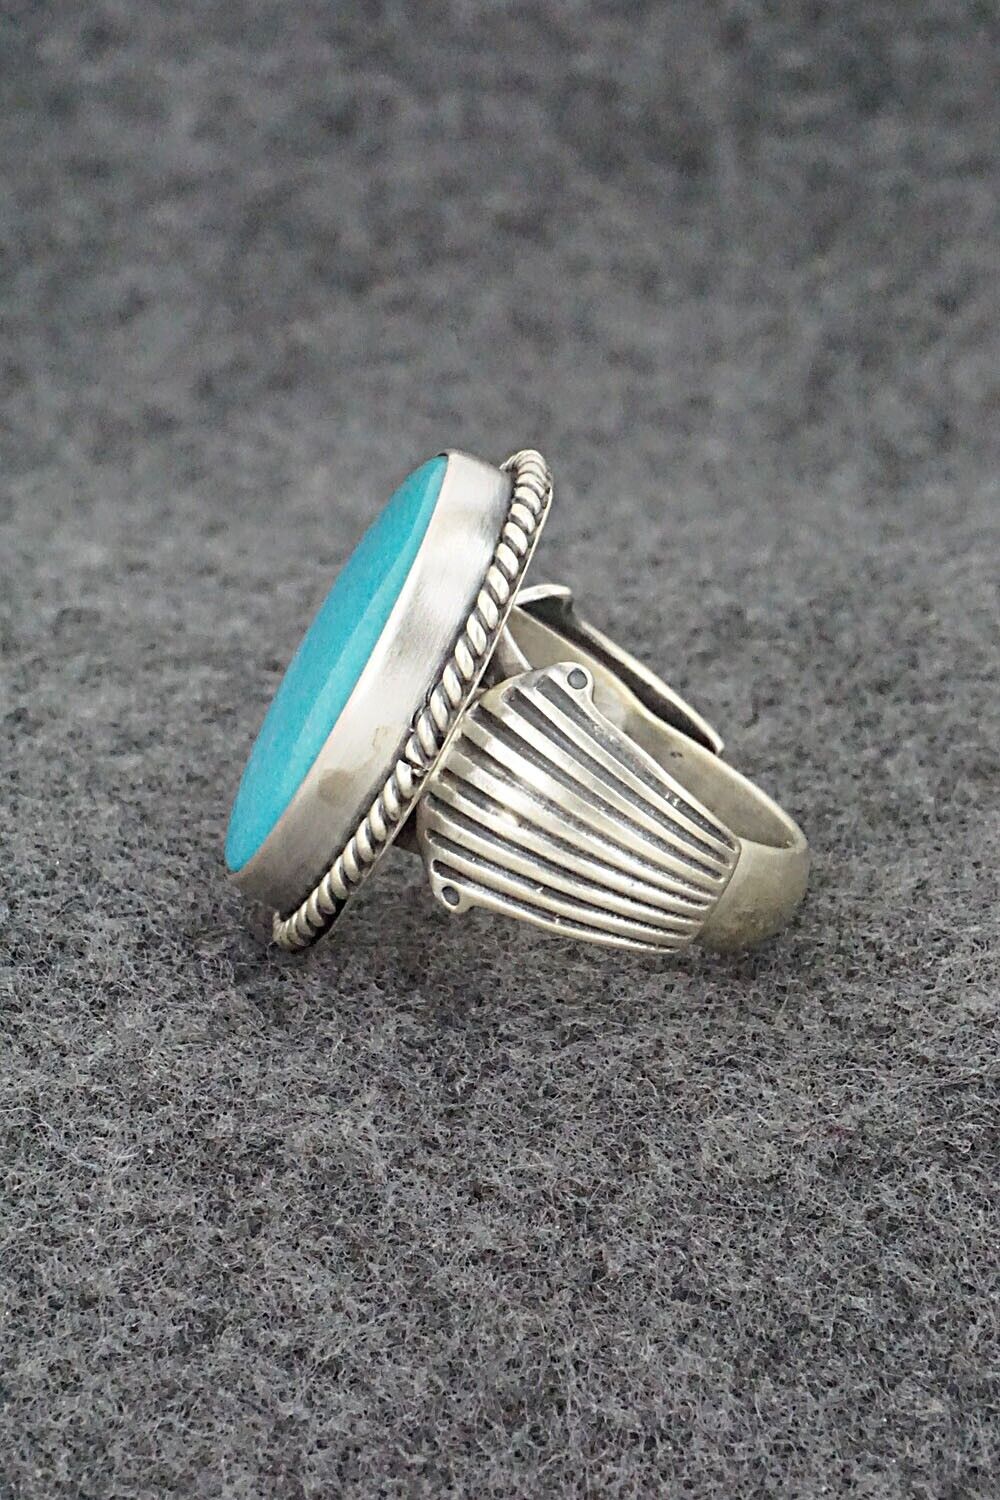 Turquoise & Sterling Silver Ring - Samuel Yellowhair - Size 7.5